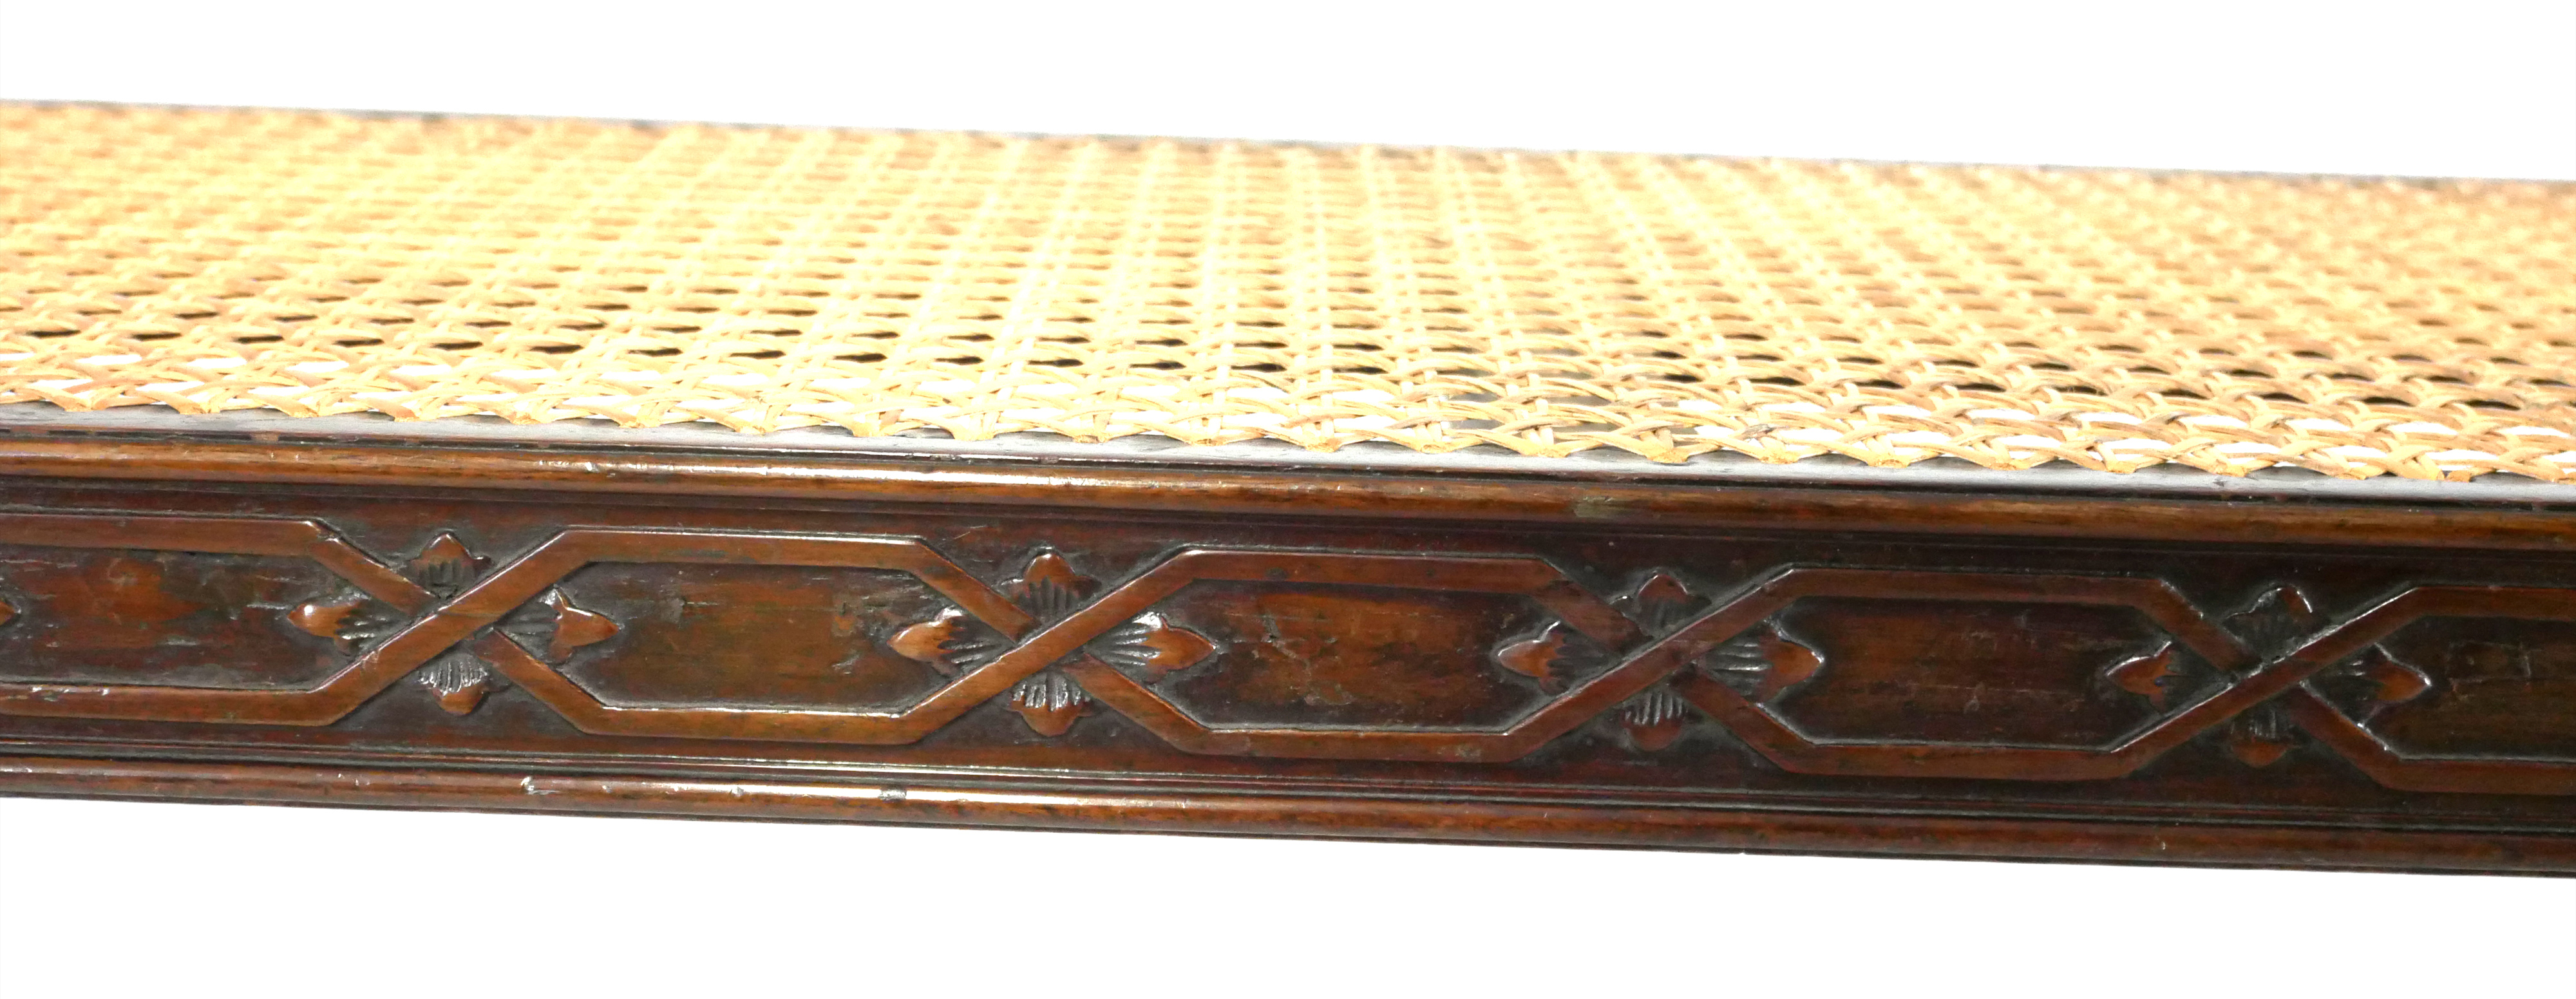 FINE 19TH CENTURY MAHOGANY WINDOW SEAT The ends carved with four scrolling eagle heads with flowers - Image 2 of 8